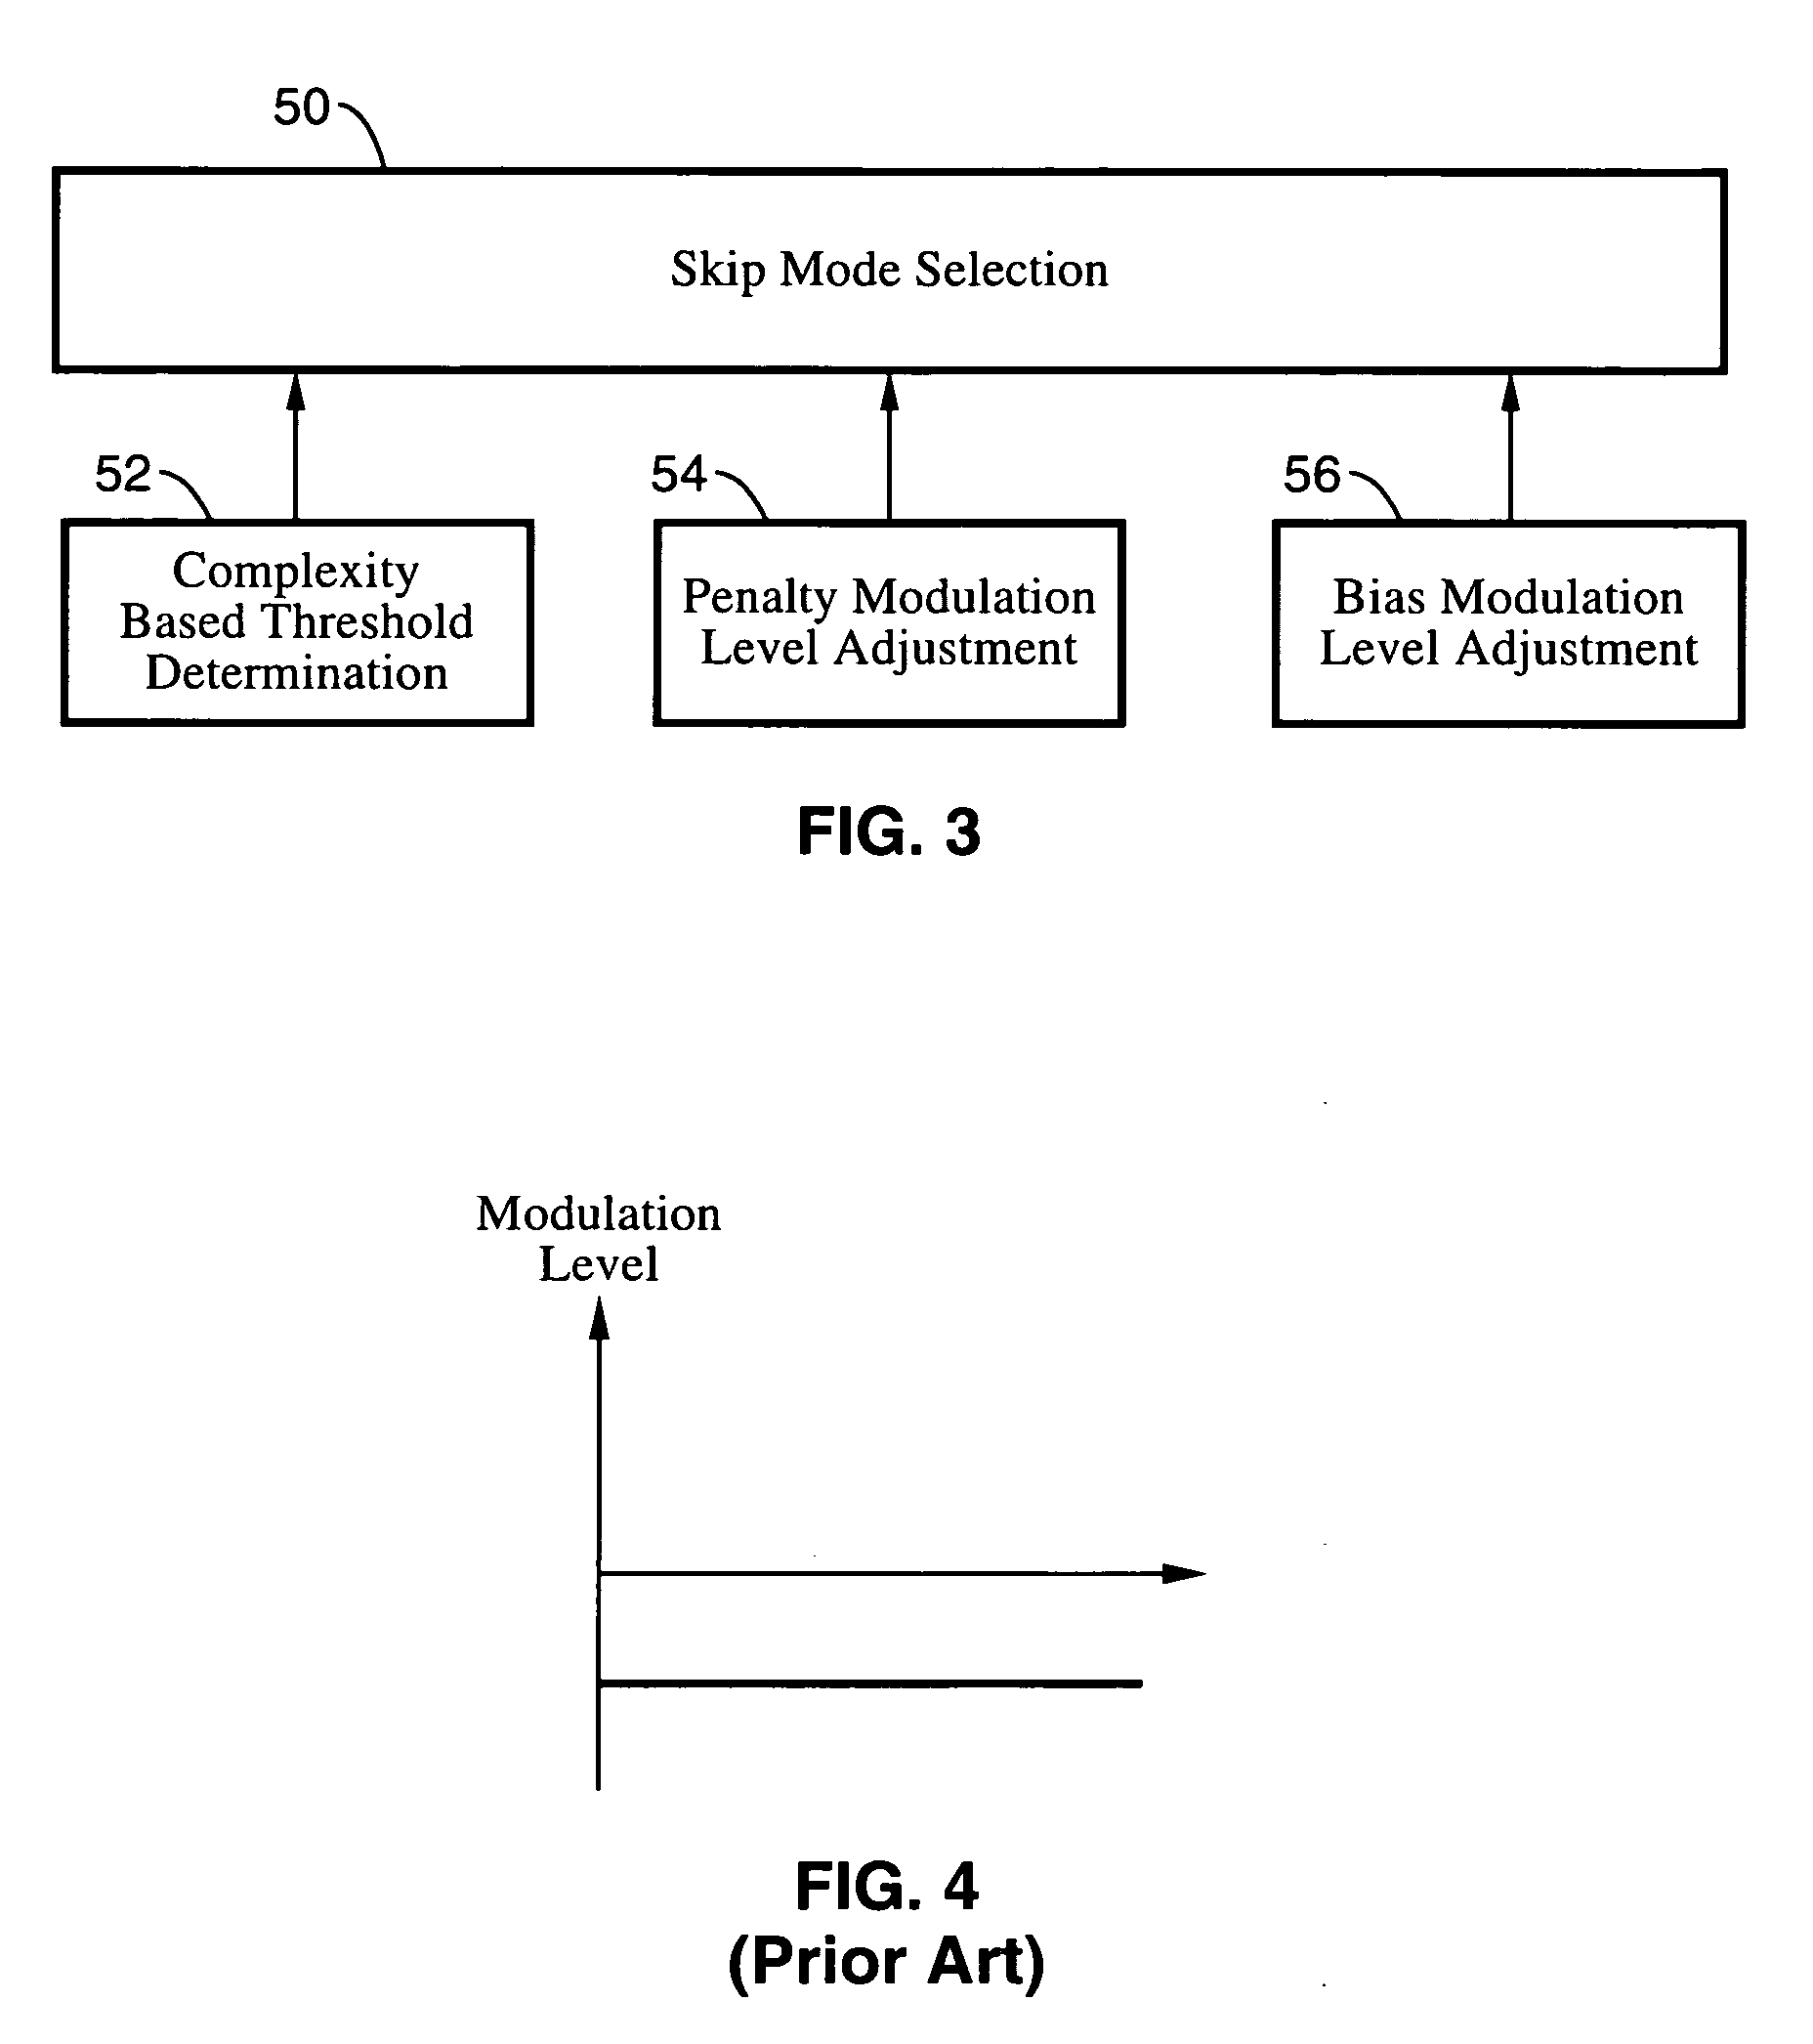 Complexity adaptive skip mode estimation for video encoding